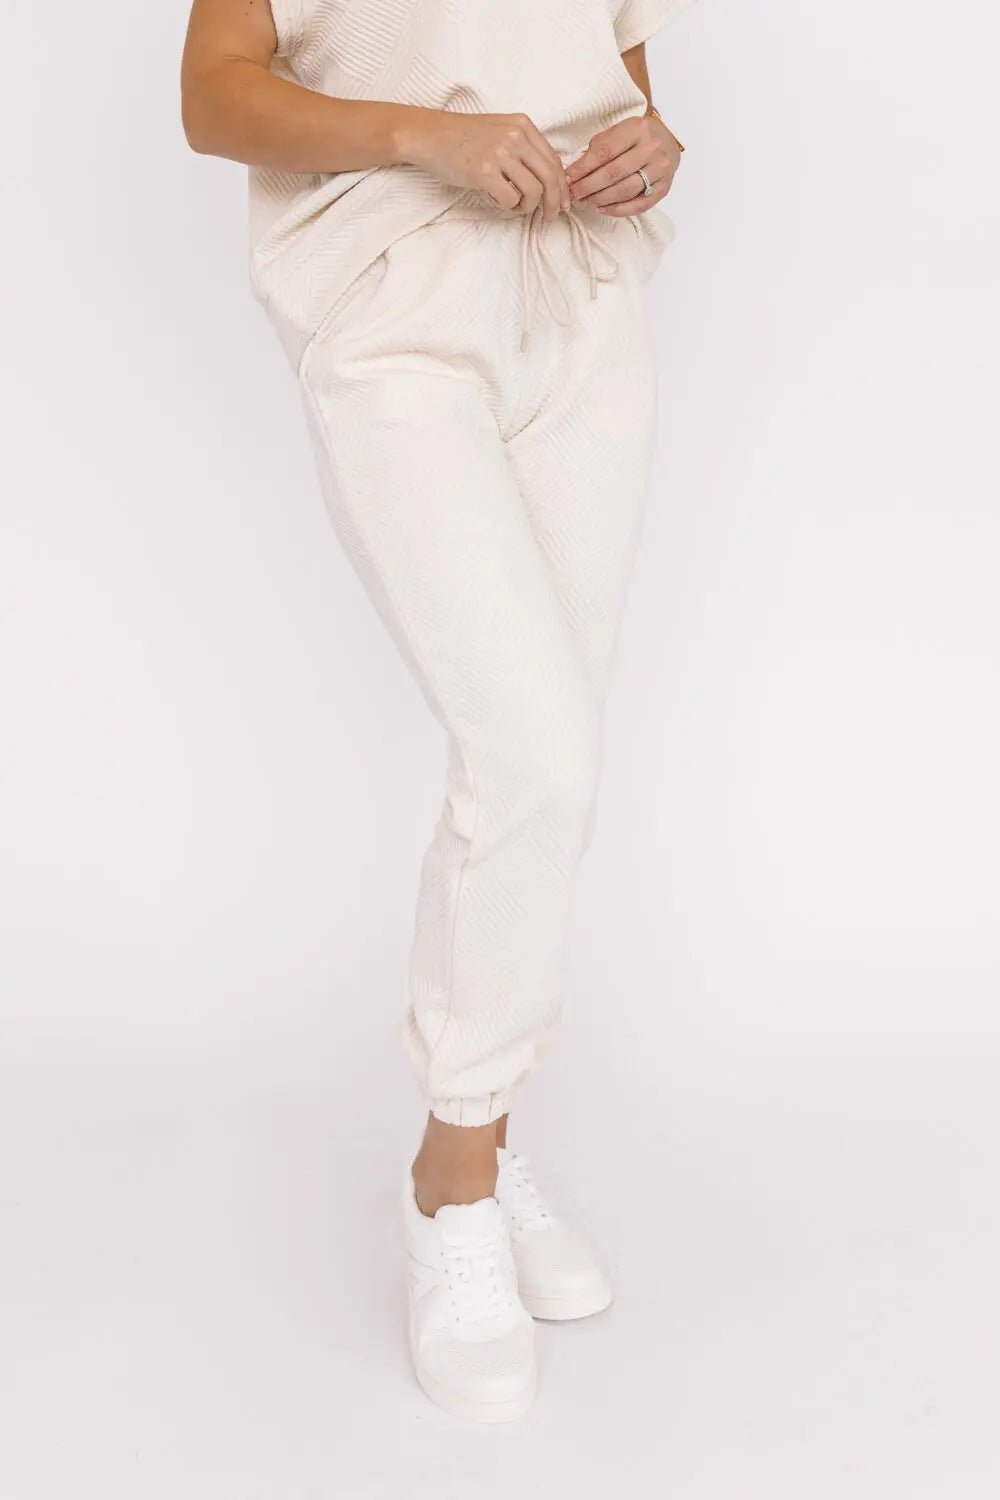 Weekend Vibe Cream Textured Joggers: Your Passport to Elevated